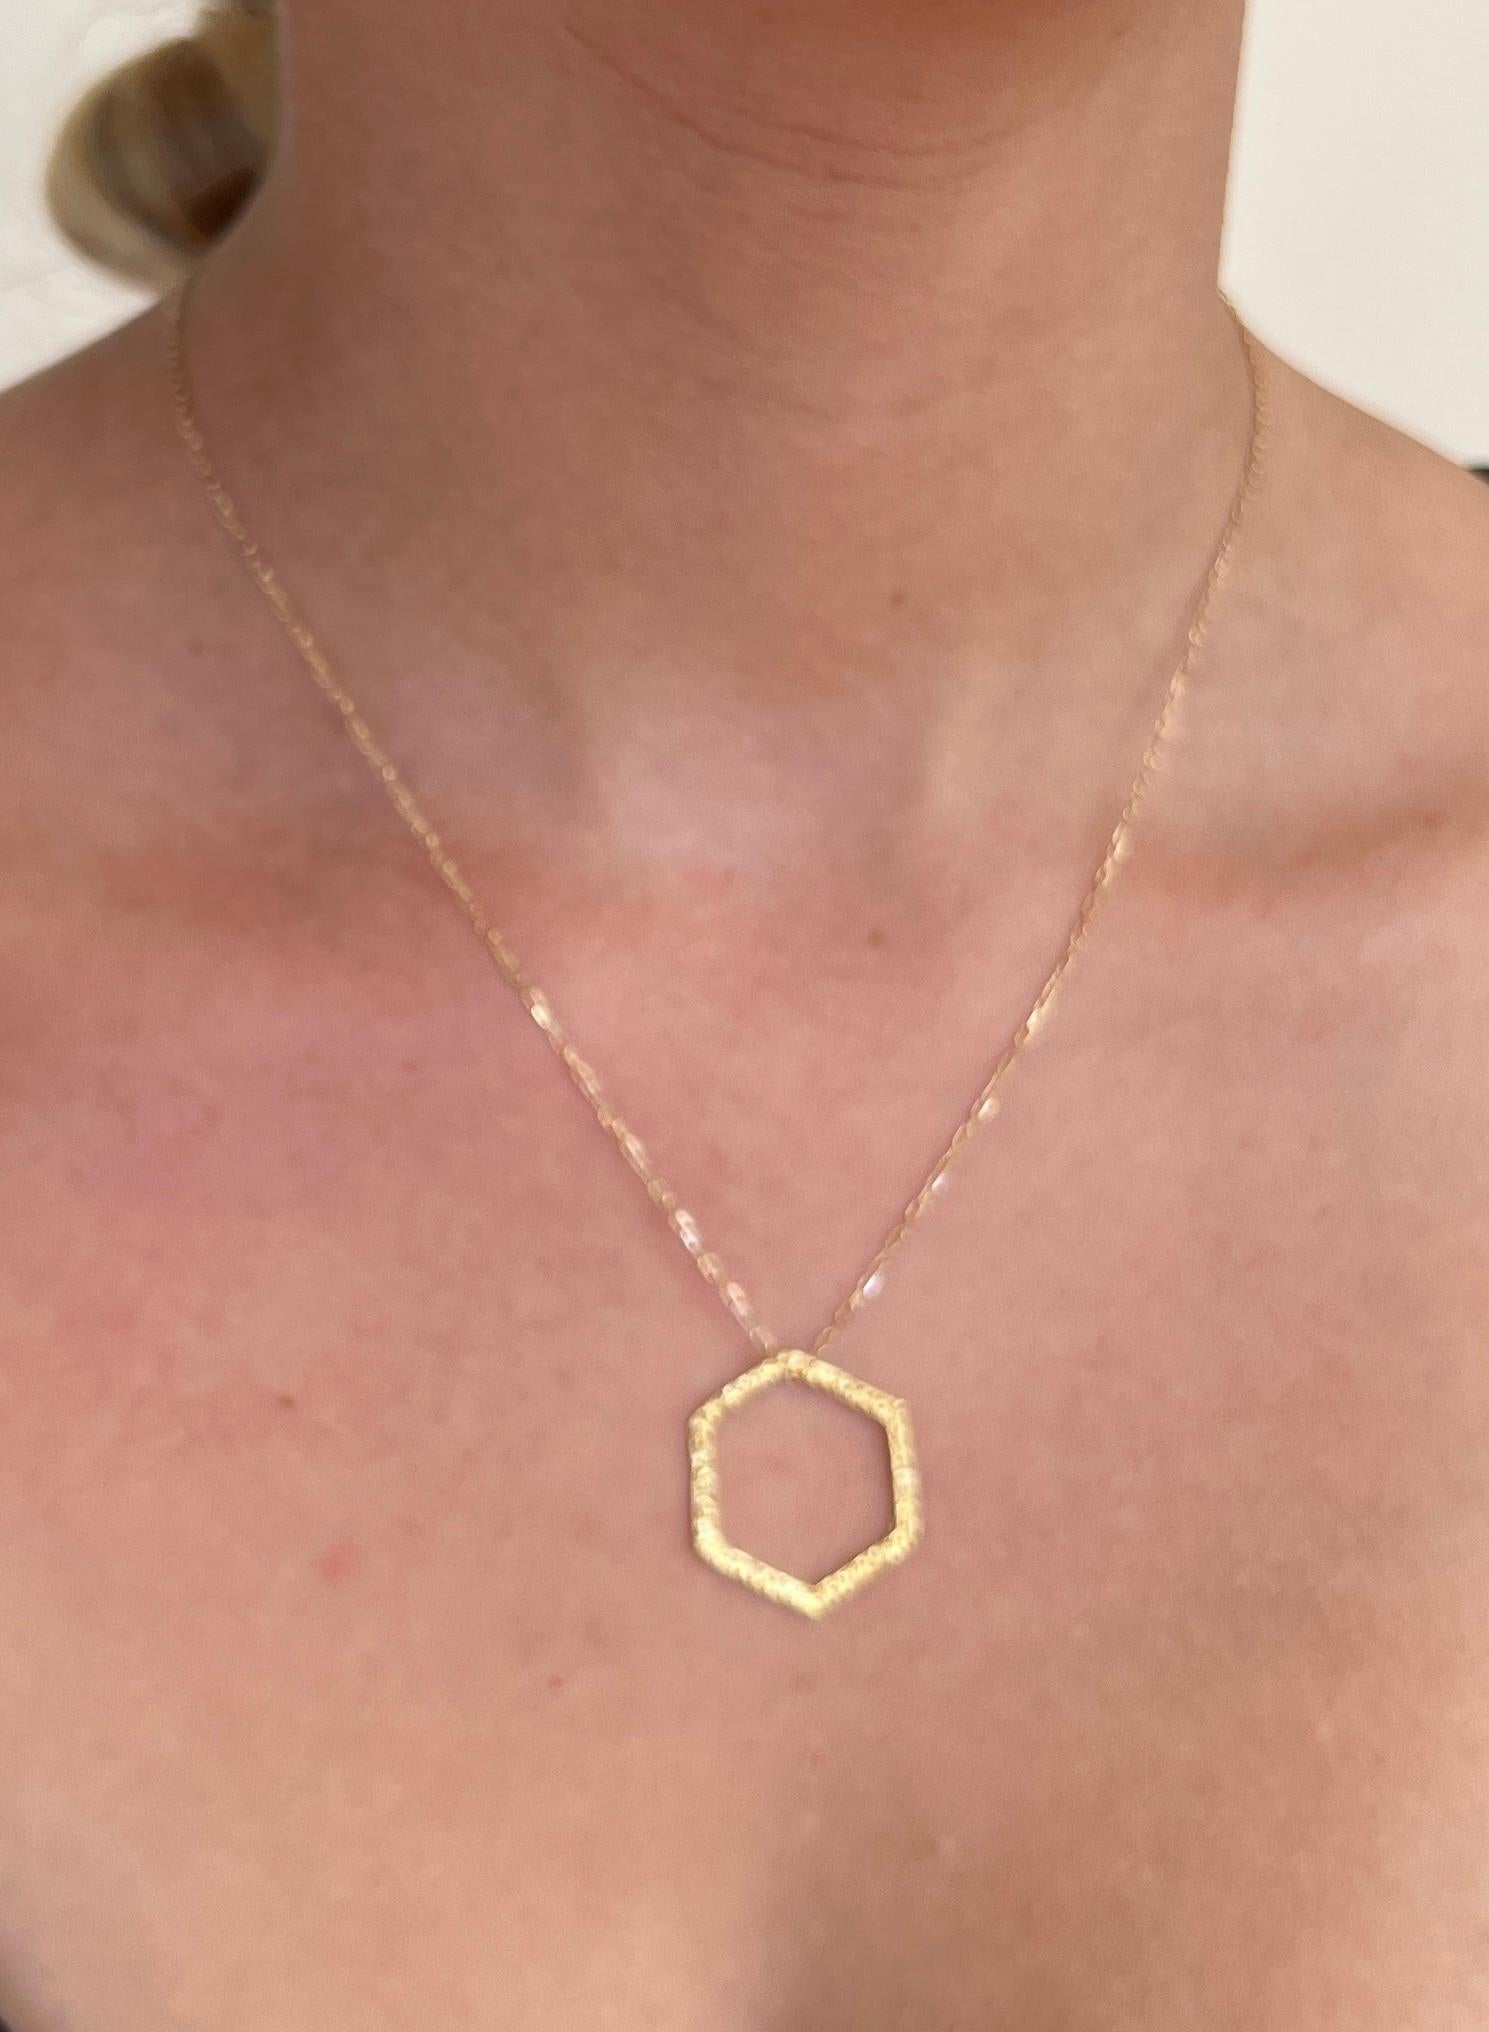 This delicate handmade 22k gold Hexagon necklace is perfect for everyday wear. Its light, delicate and makes a statement with the rich color of 22k gold and Tagili's signature finish. Perfect for layering. Comes on an adjustable 18